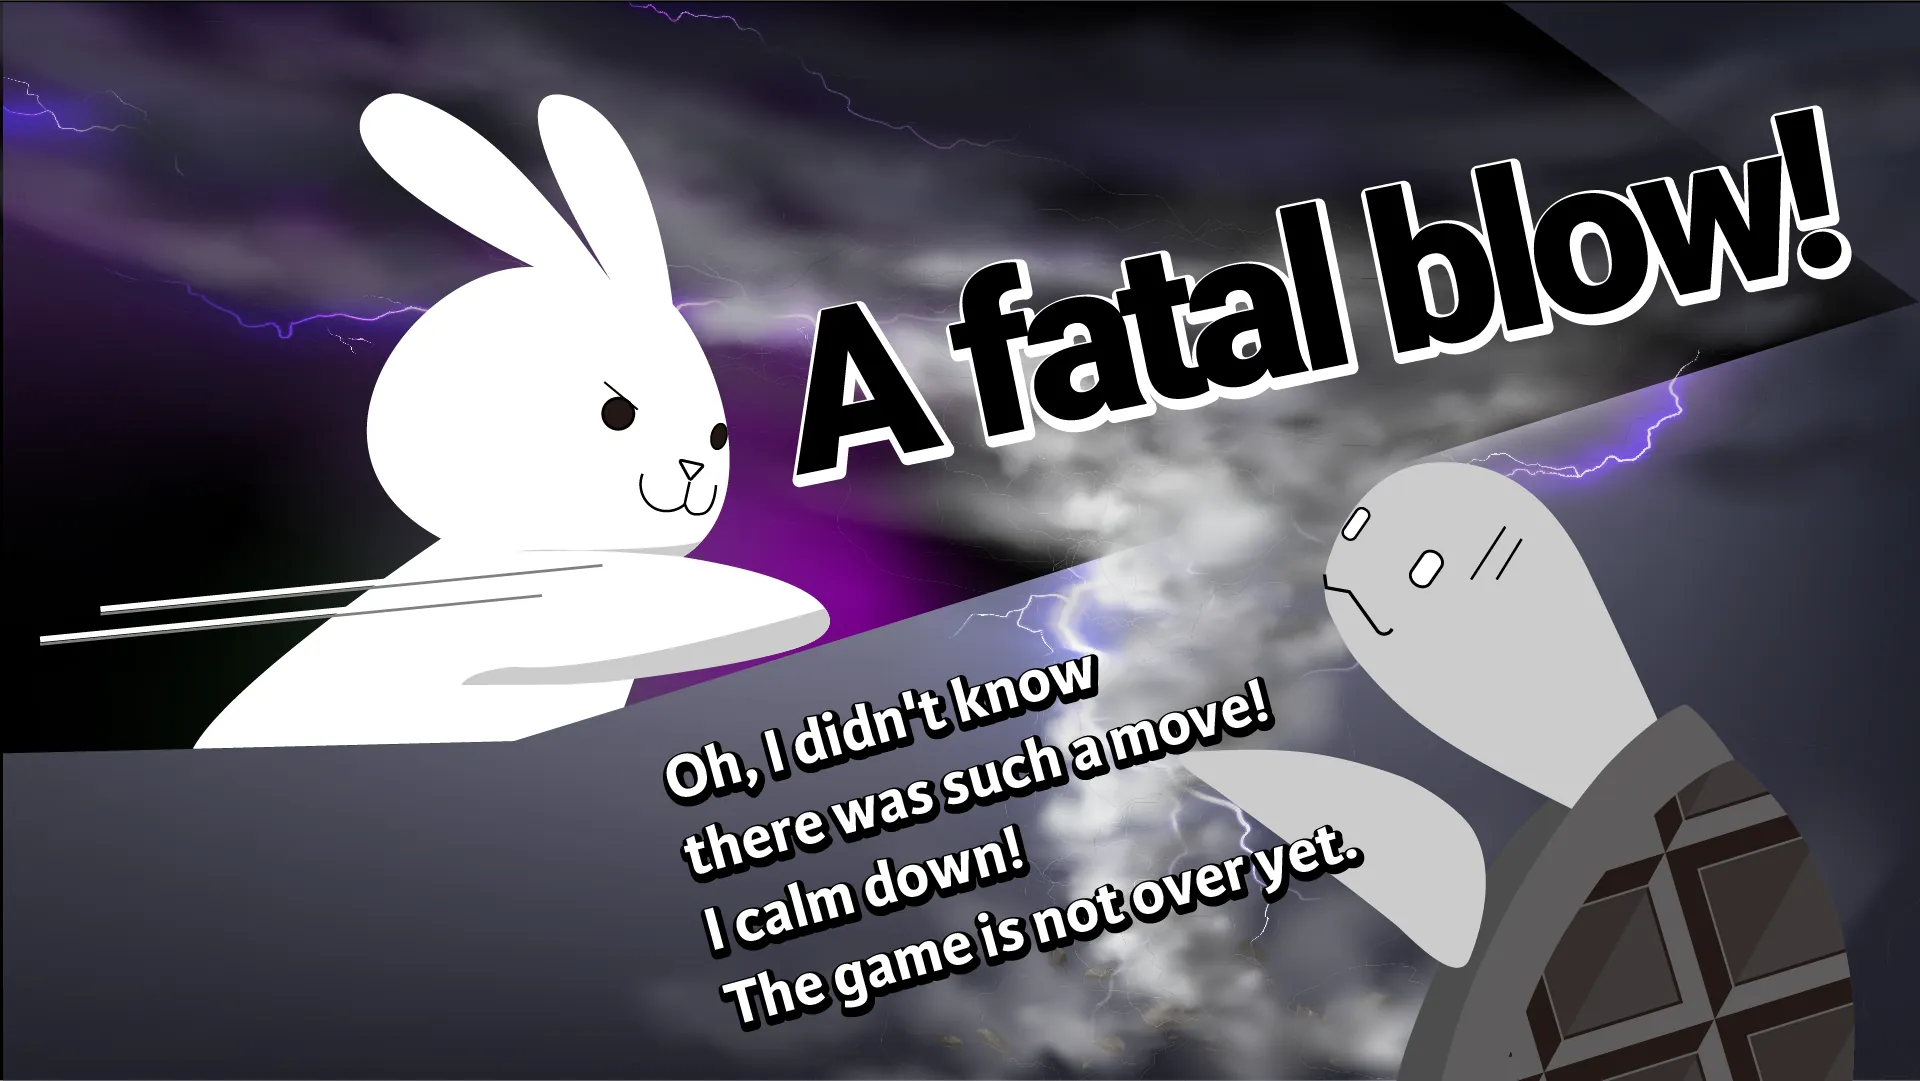 A fatal blow!Oh, I didn't know there was such a move!I calm down!The game is not over yet.